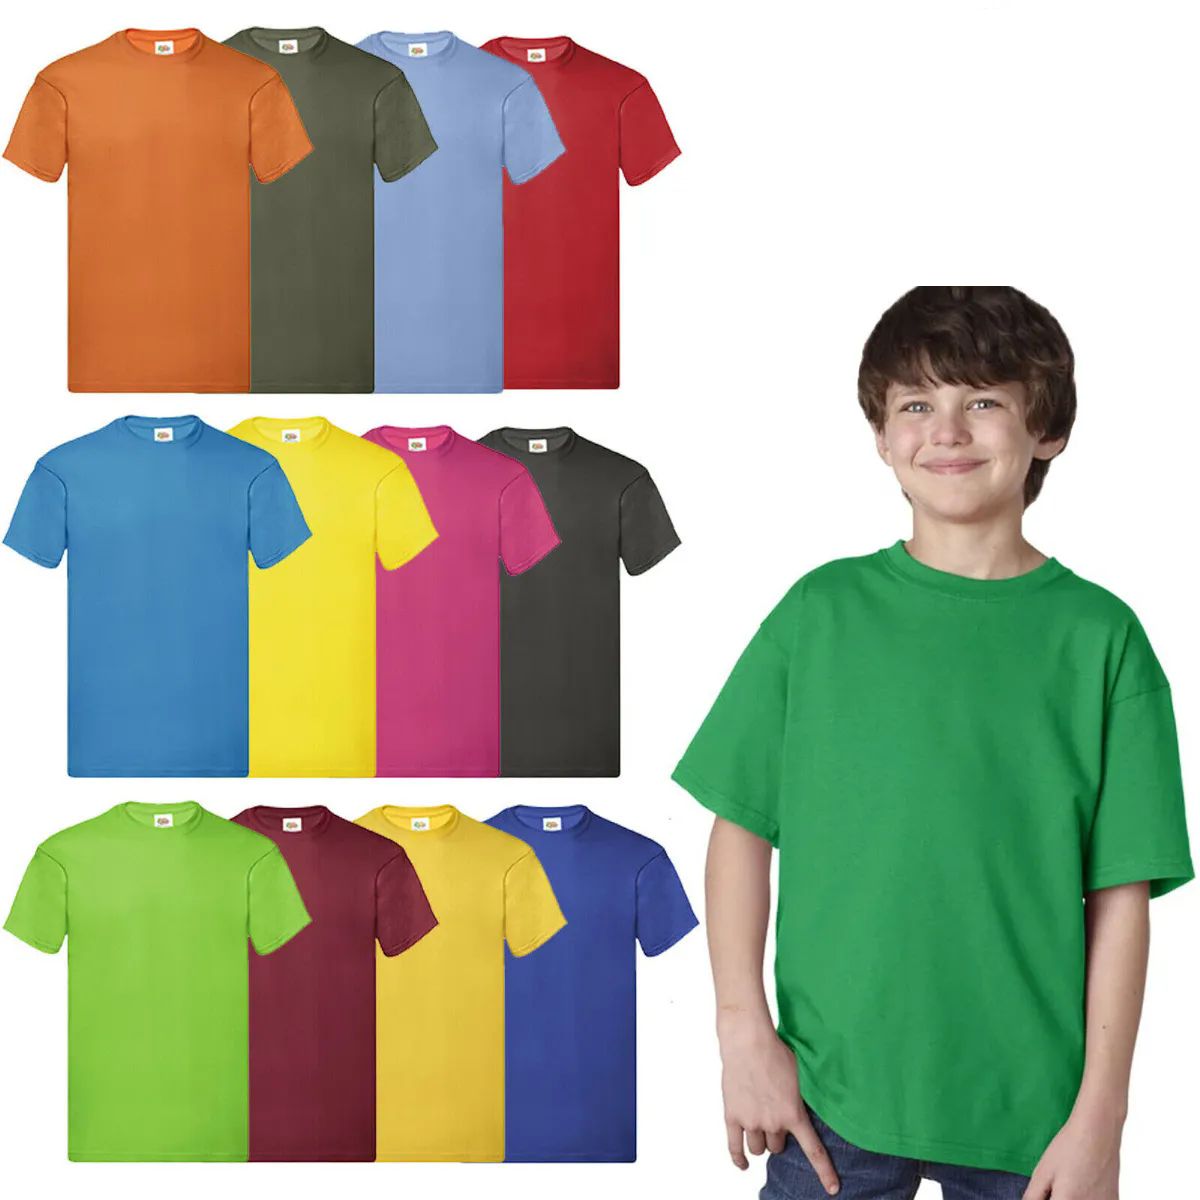 504 Pieces of Billion Hats Kids Youth Cotton Assorted Colors T Shirts Size XL